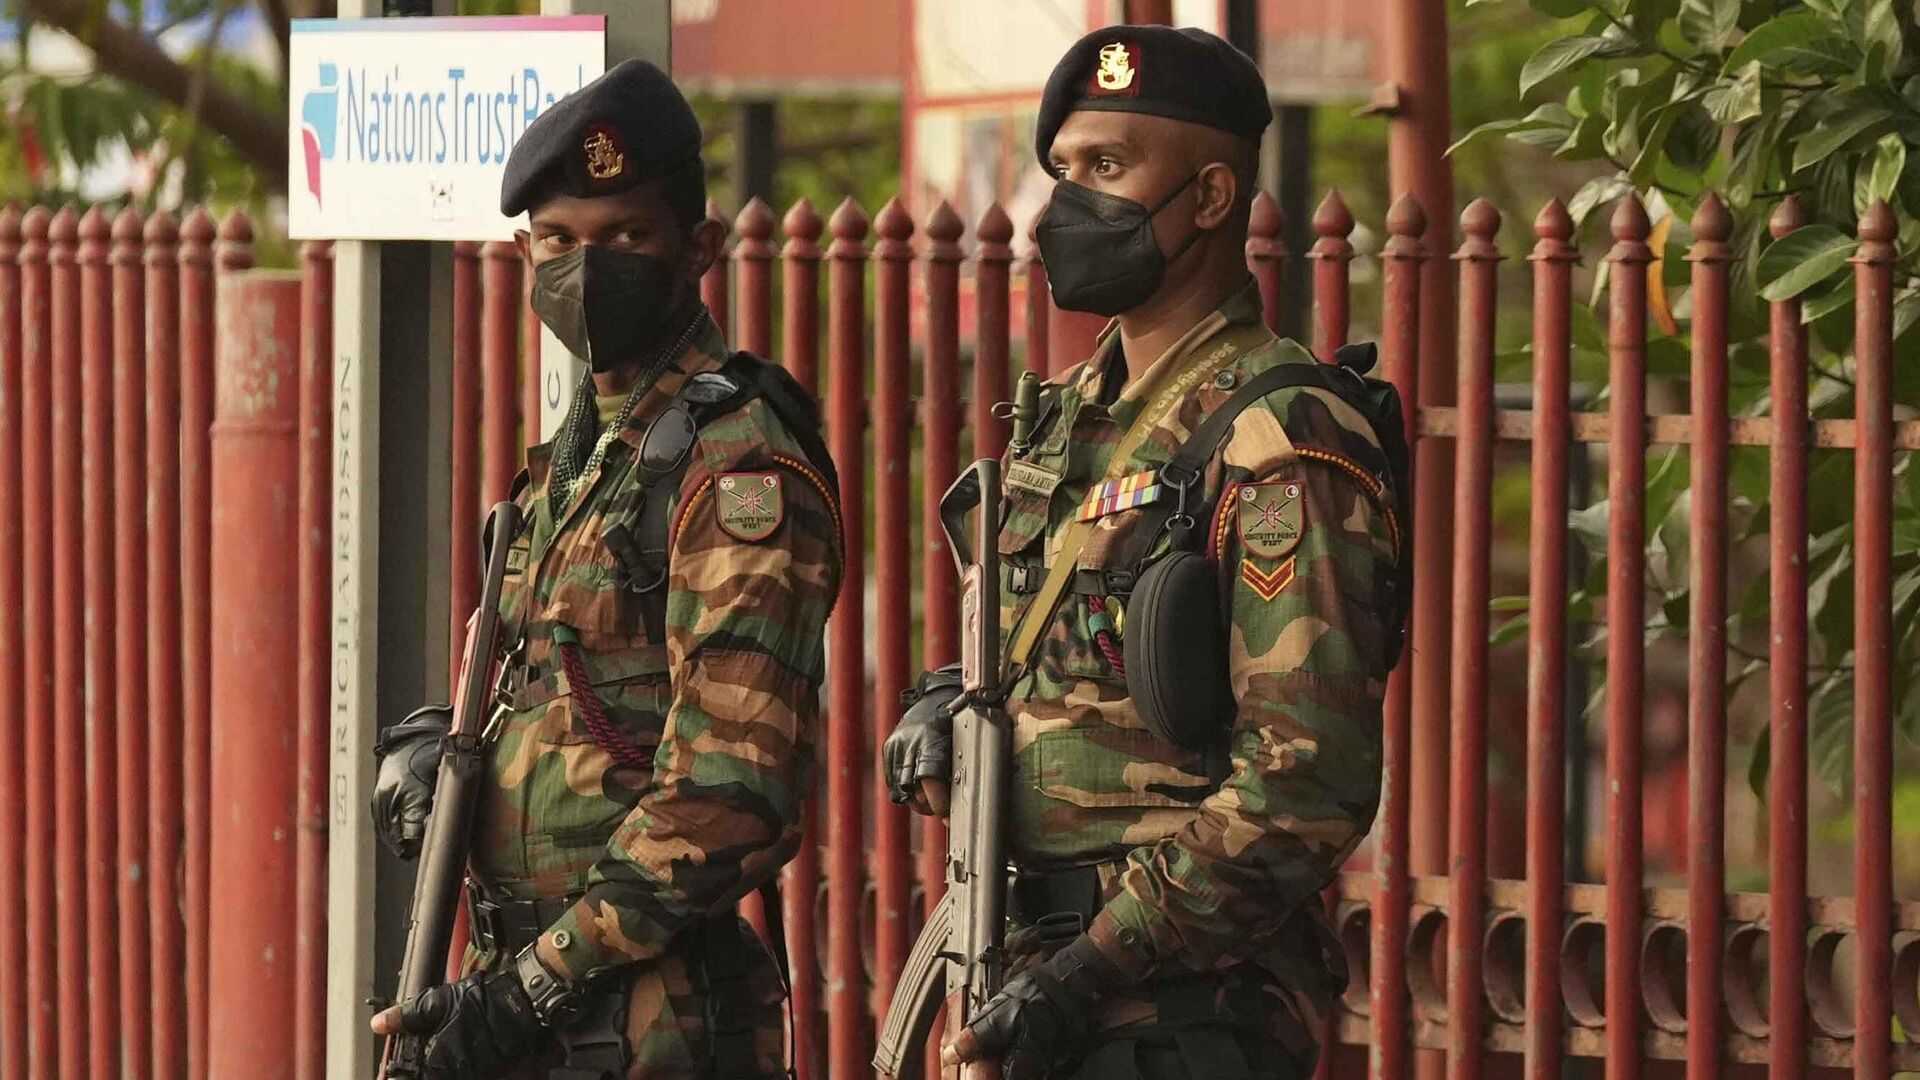 Sri Lankan army soldiers stand guard before curfew begins in Colombo, Sri Lanka, Saturday, April 2, 2022. Sri Lanka imposed a countrywide curfew starting Saturday evening until Monday morning, in addition to a state of emergency declared by the president, in an attempt to prevent more unrest after protesters took to the streets blaming the government for the worsening economic crisis.  - Sputnik International, 1920, 02.04.2022